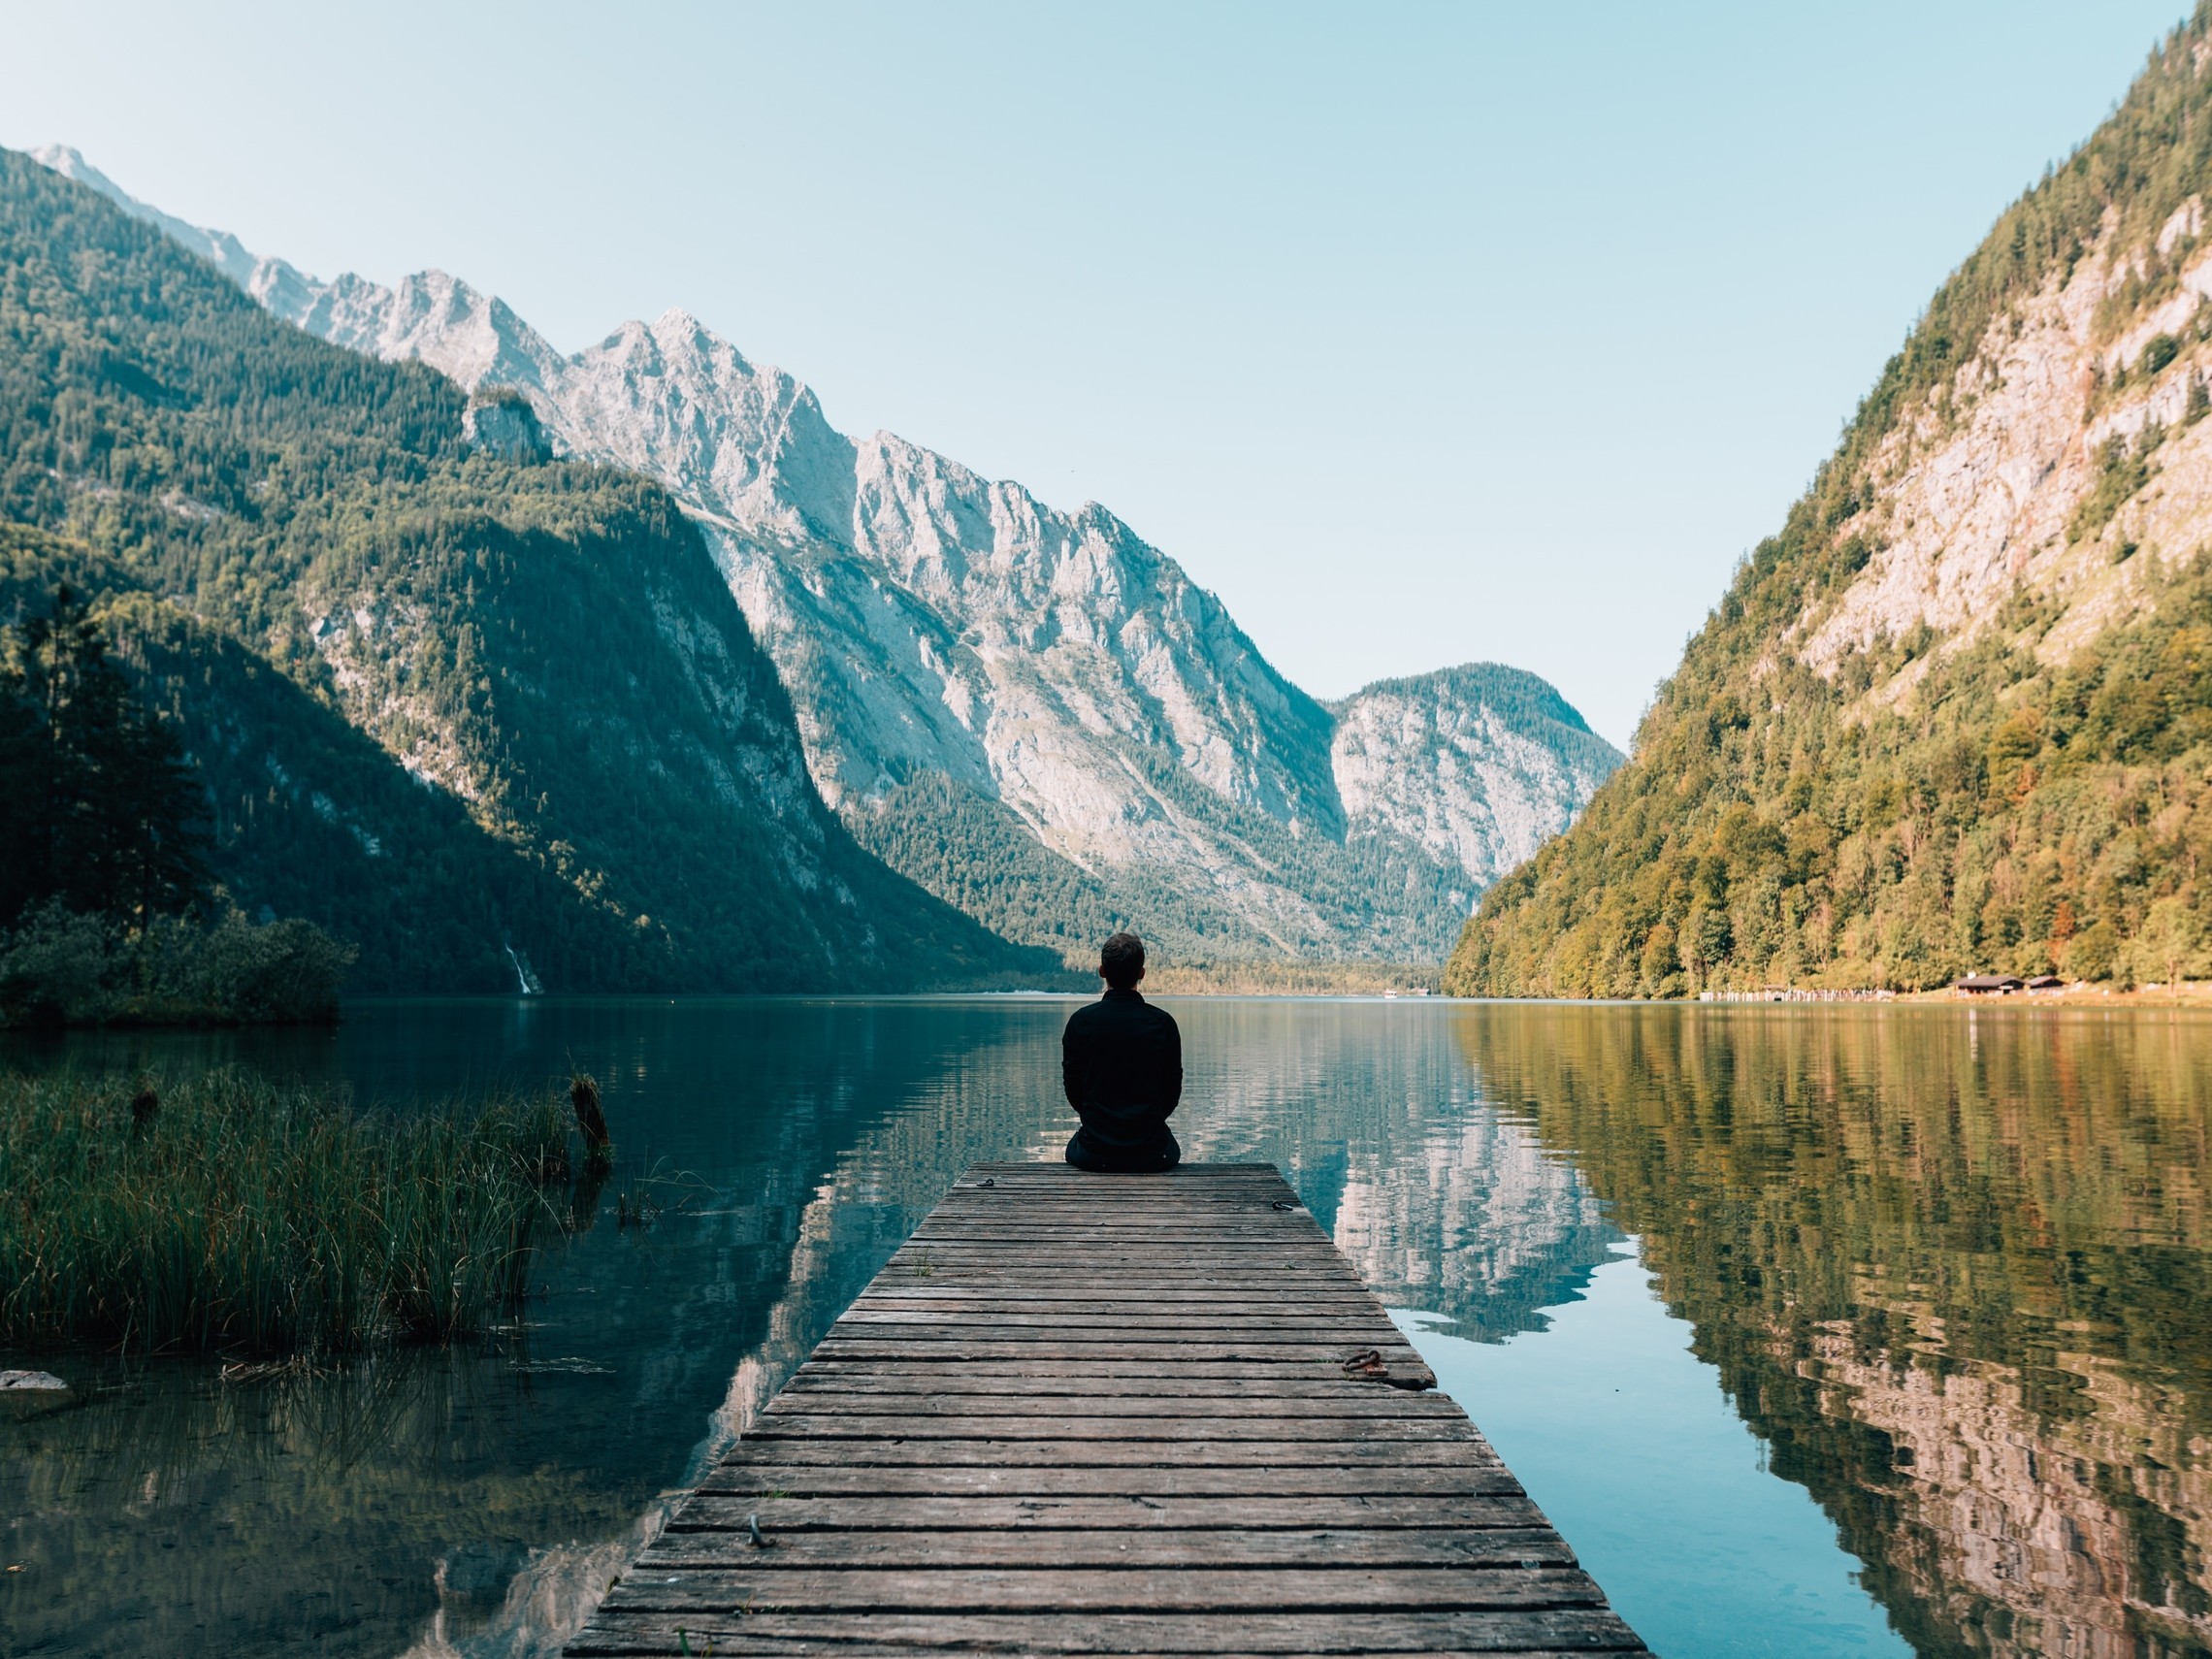 Person sitting on a dock near a lake surrounded by mountains